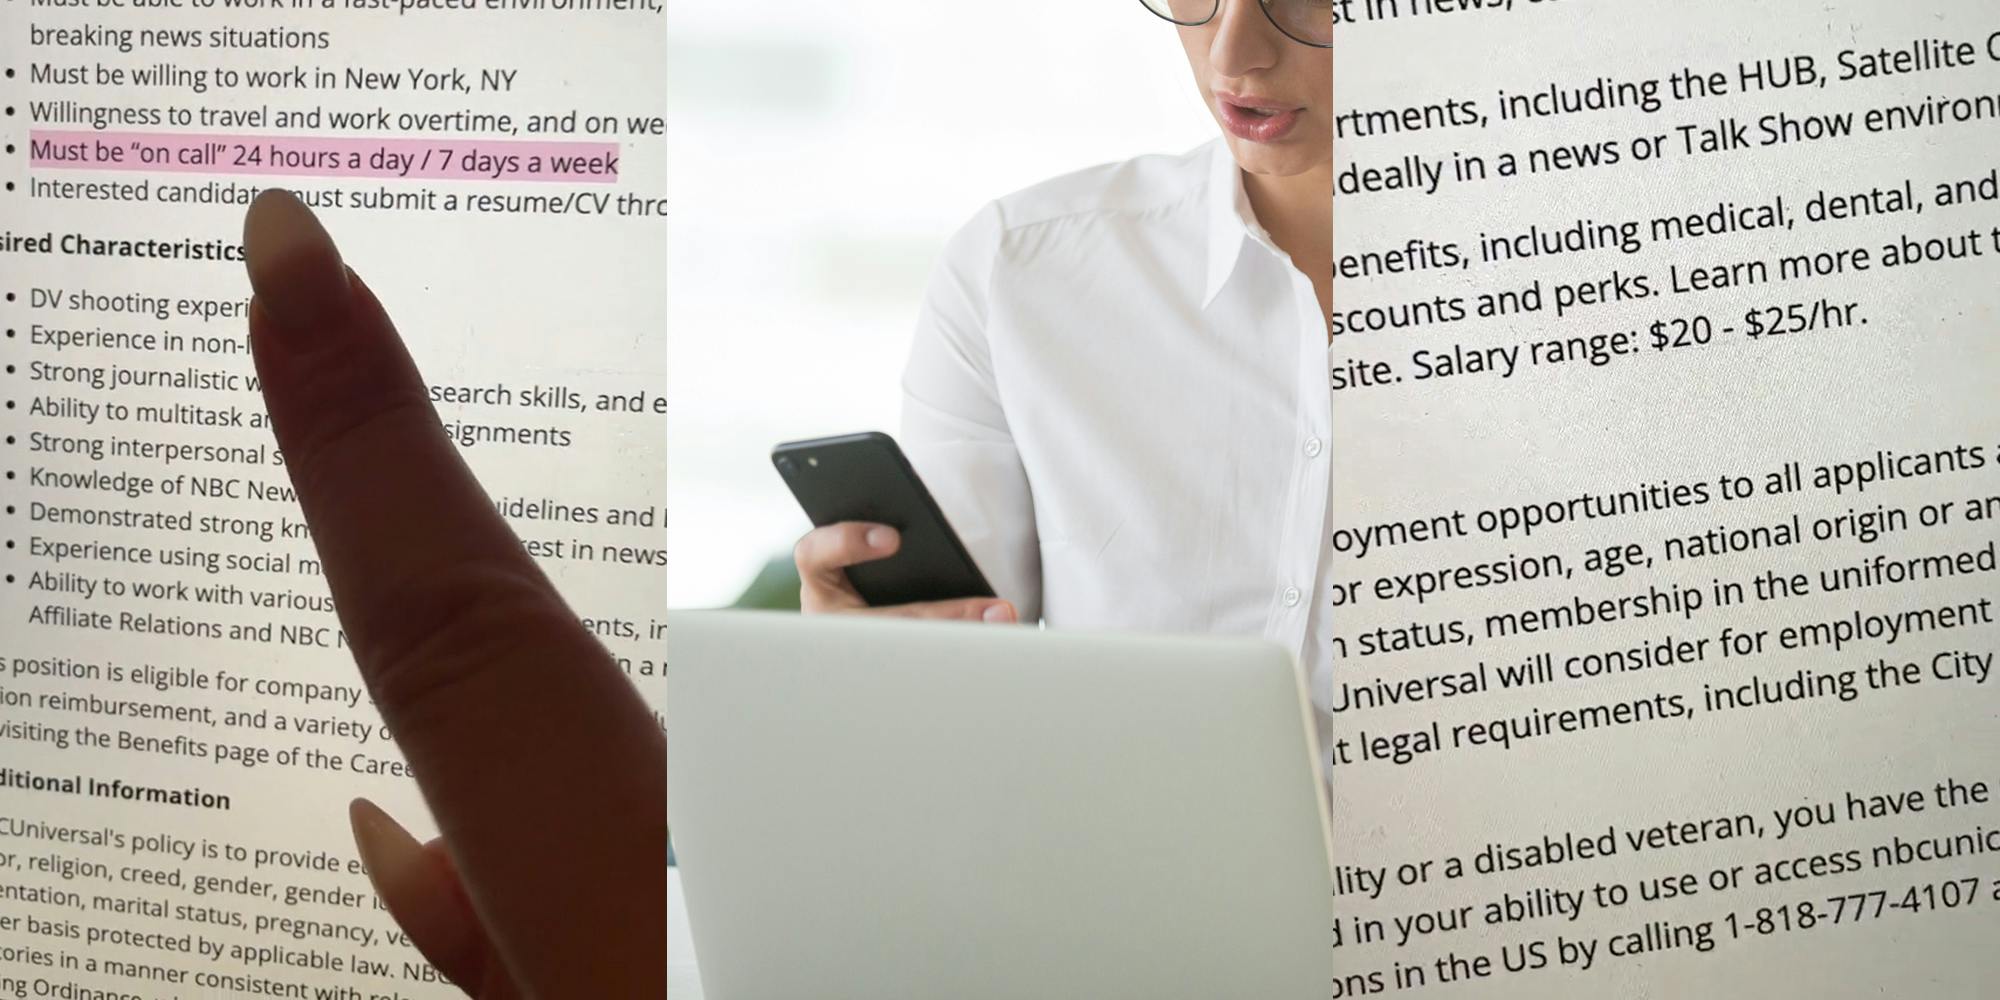 finger pointing to job listing highlighted text "Must be "on call" 24 hours a day / 7 days a week" (l) angry office woman holding phone in front of laptop (c) job listing's salary range "$20-$25/hr." (r)